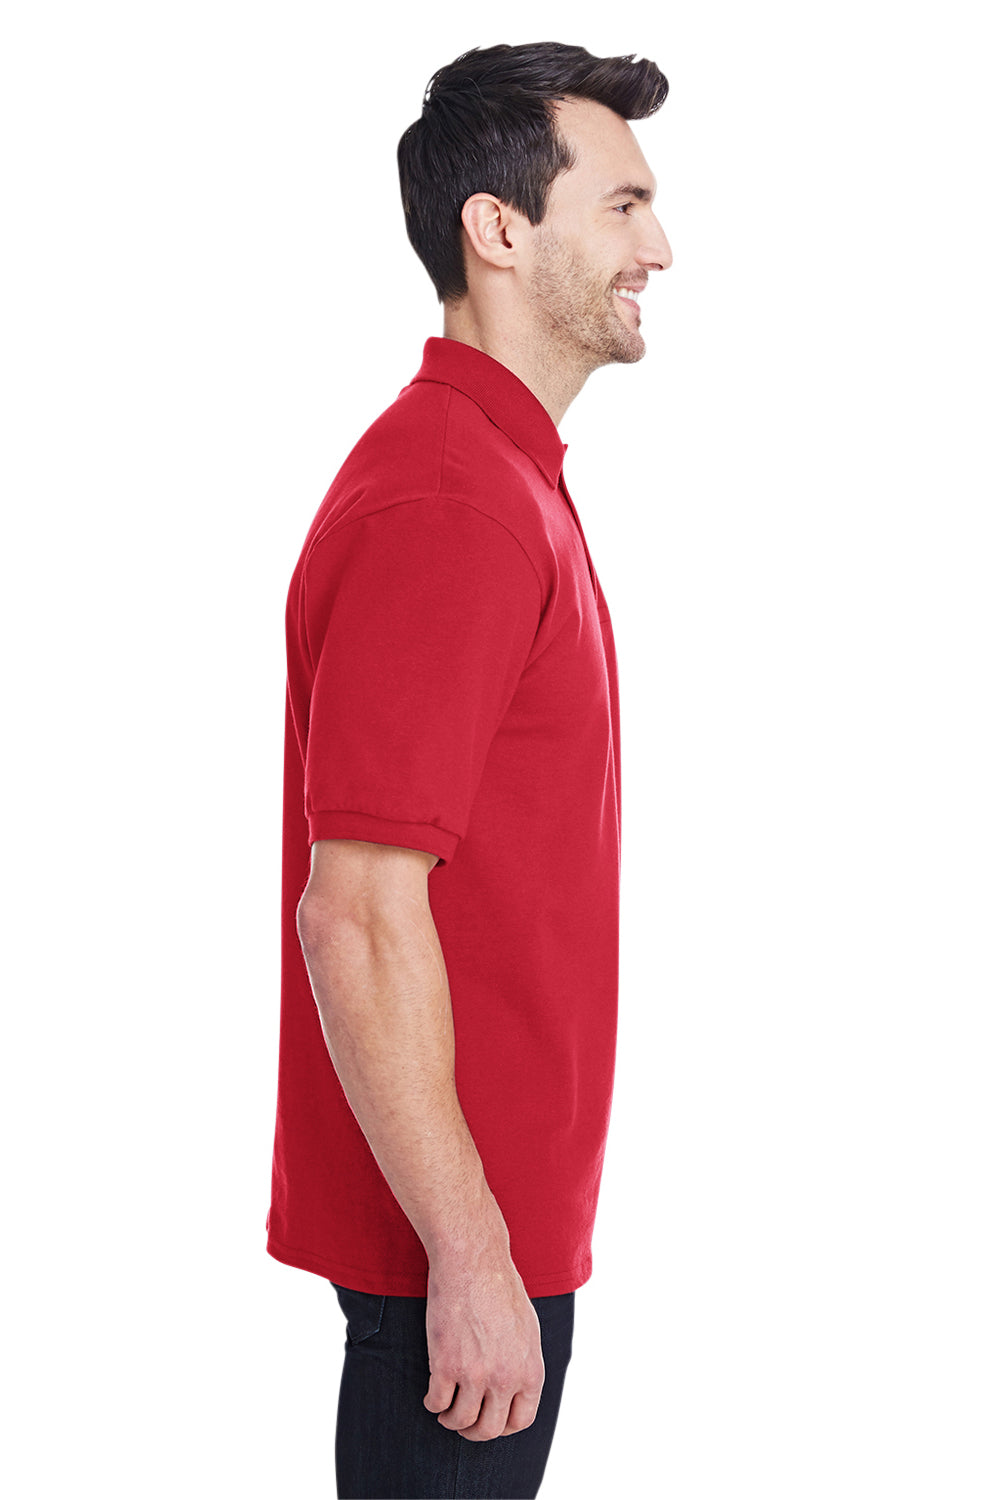 Jerzees 443MR Mens Short Sleeve Polo Shirt Red Side